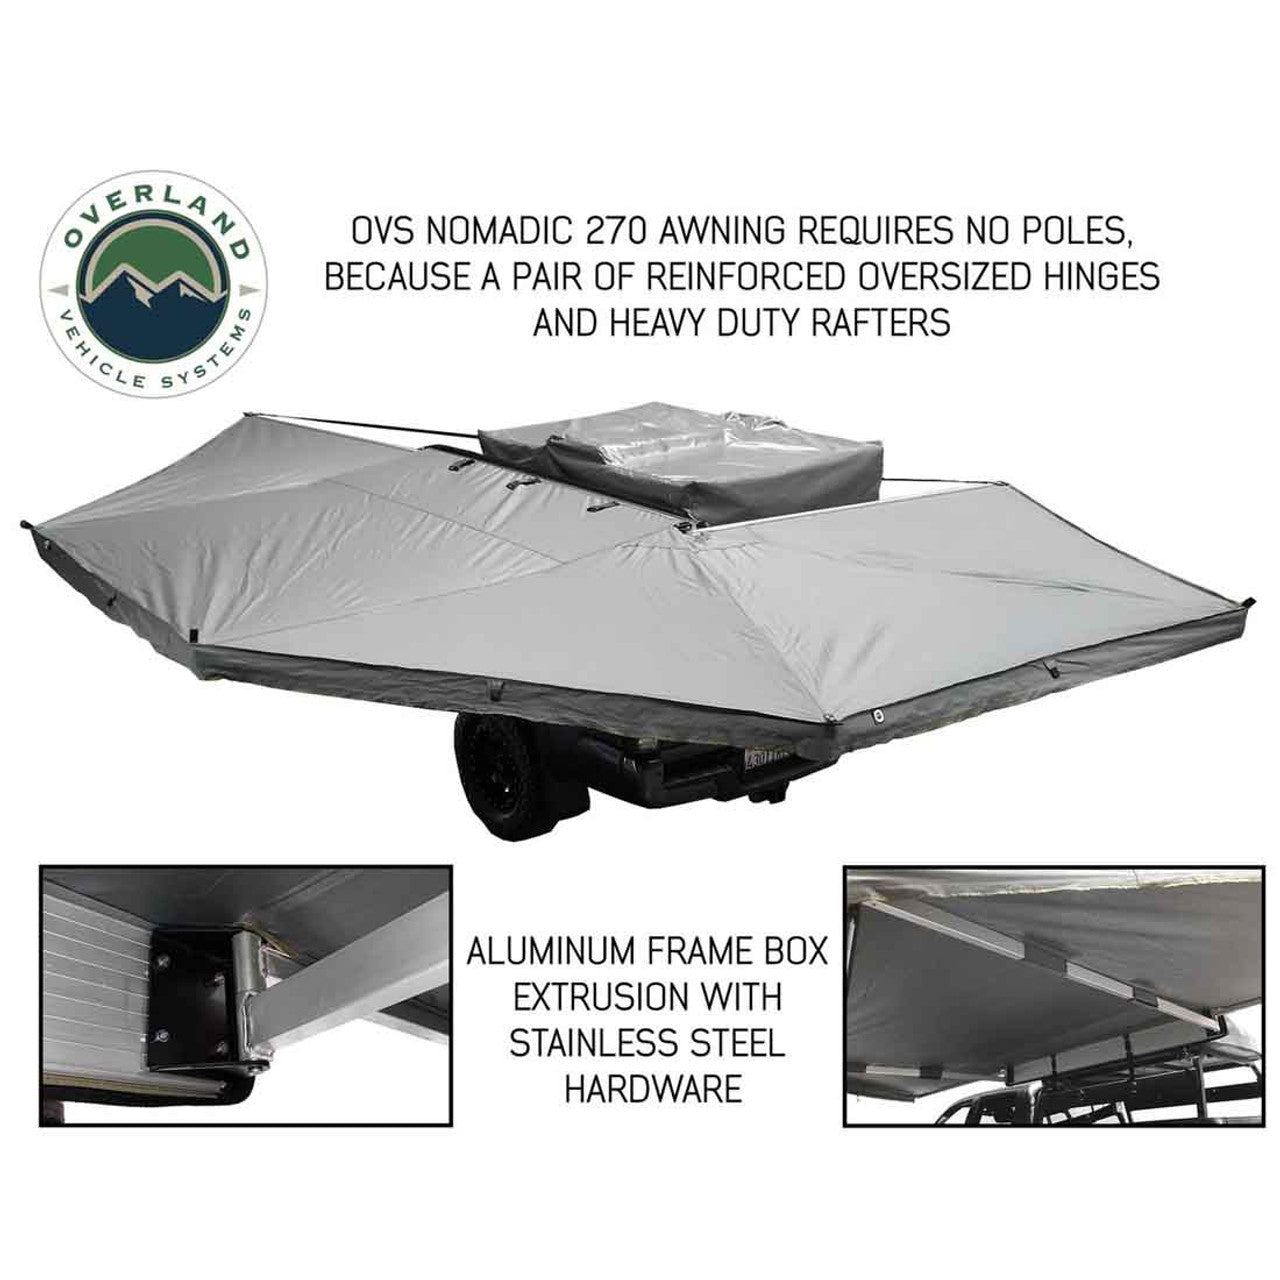 Nomadic 270 Awning - Dark Gray Cover With Black Cover Universal - by OVS